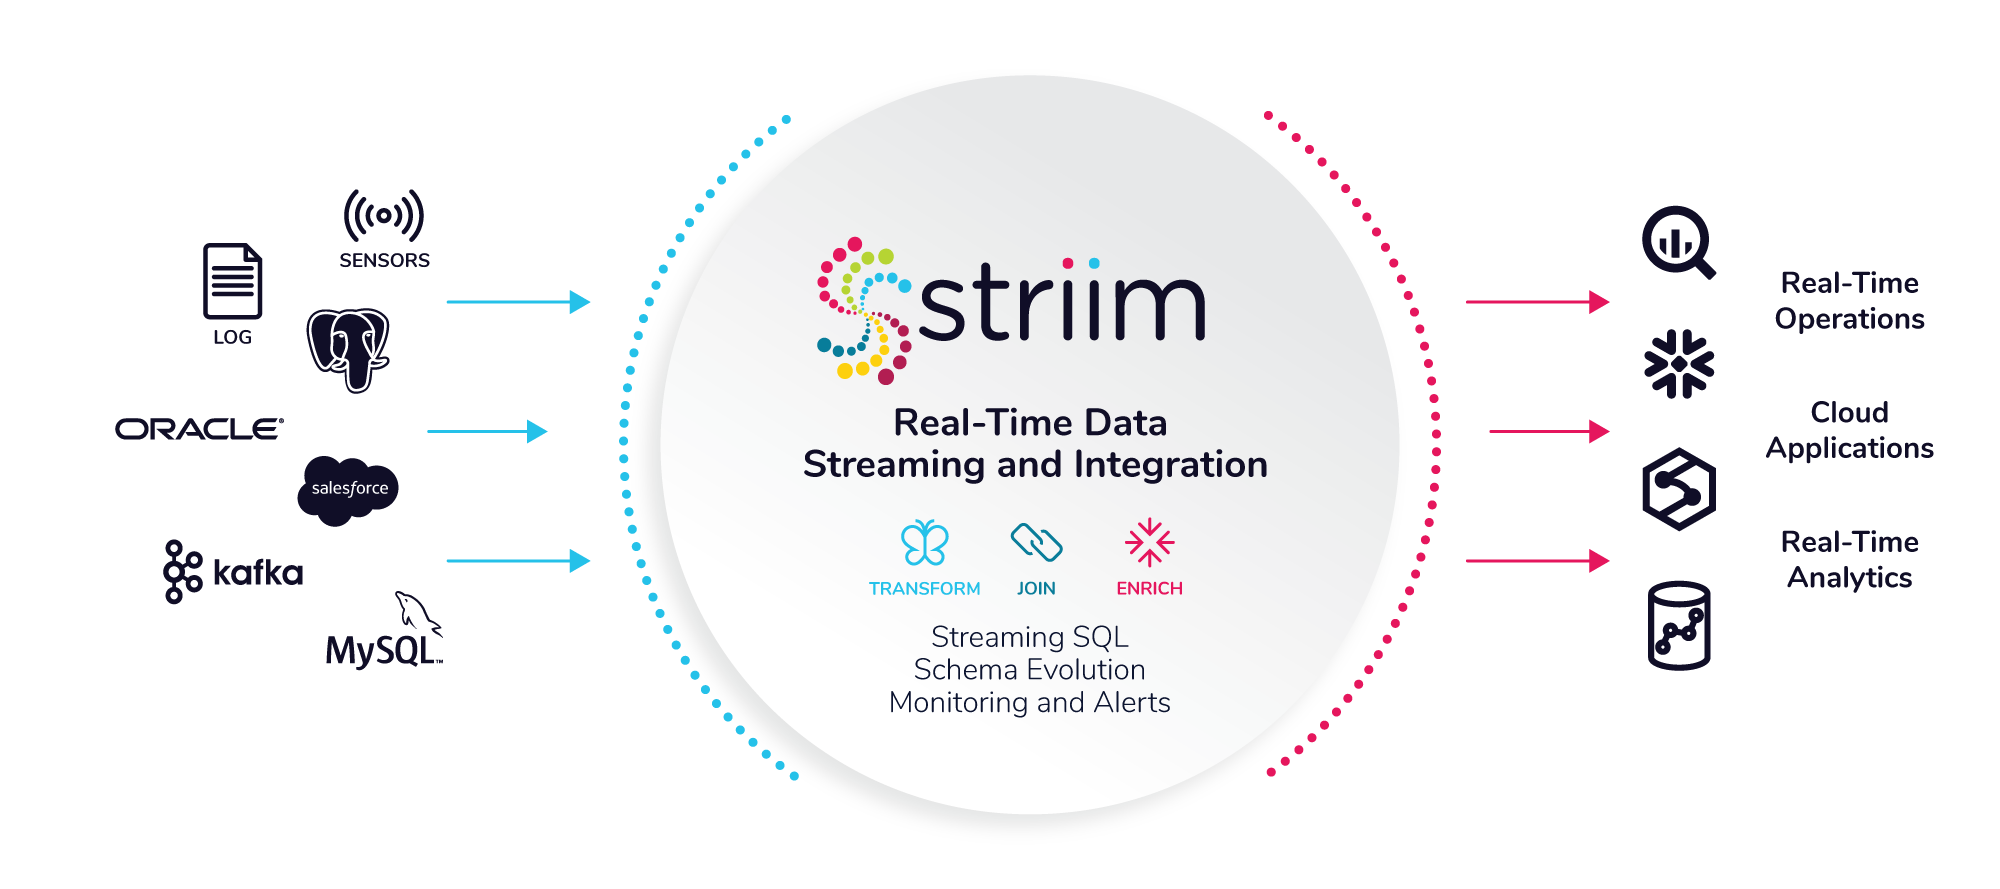 Striim enables real time data replication